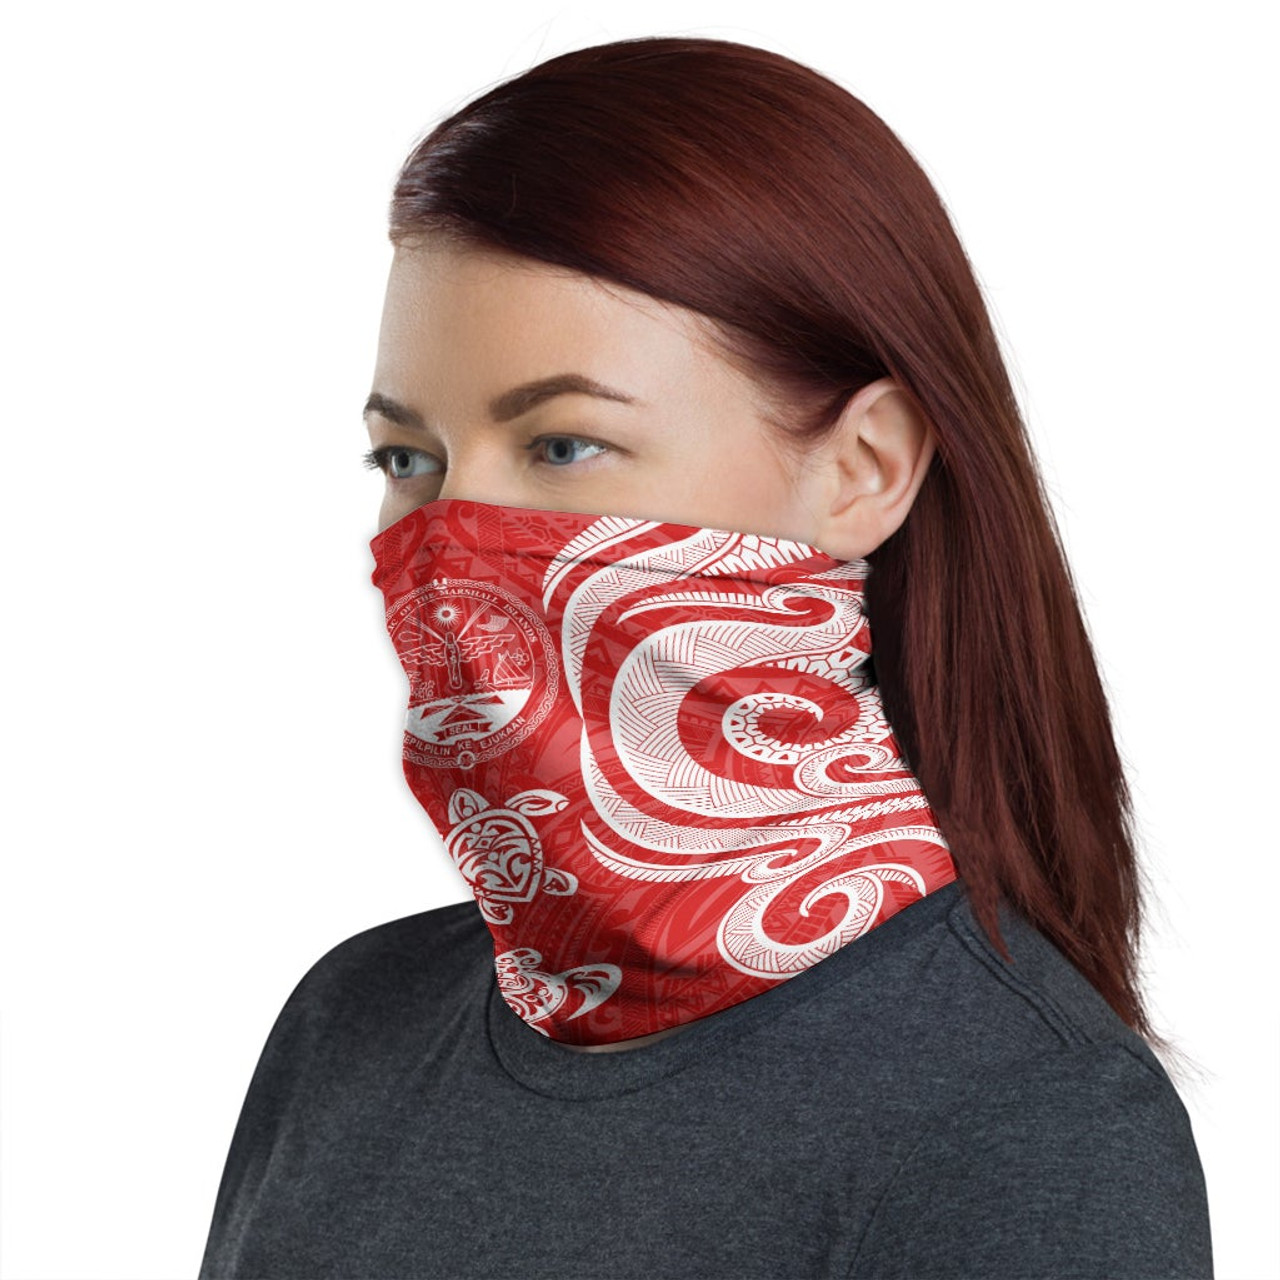 Marshall Islands Crest Neck Gaiter - Turtle Tentacle White Red 1